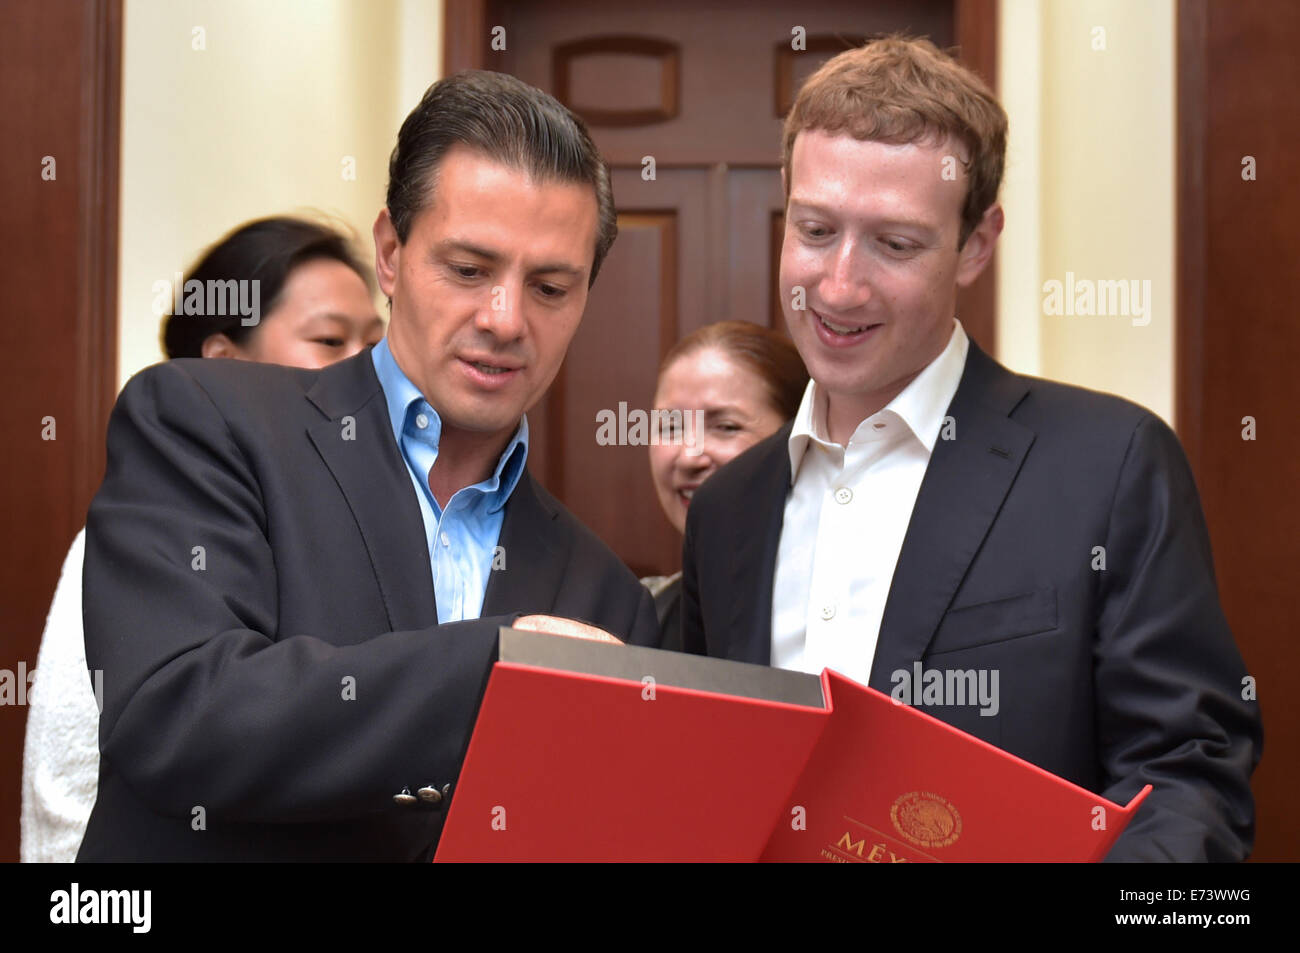 Mexico City, Mexico. 5th Sep, 2014. Photo provided by Mexico's Presidency shows Mexican President Enrique Pena Nieto (L) meeting with the social network Facebook founder Mark Zuckerberg, during their meeting in Mexico City, capital of Mexico, on Sept. 5, 2014. Mexico will work hand-in-hand with Facebook, said President Enrique Pena Nieto on Friday. Credit:  Mexico's Presidency/Xinhua/Alamy Live News Stock Photo